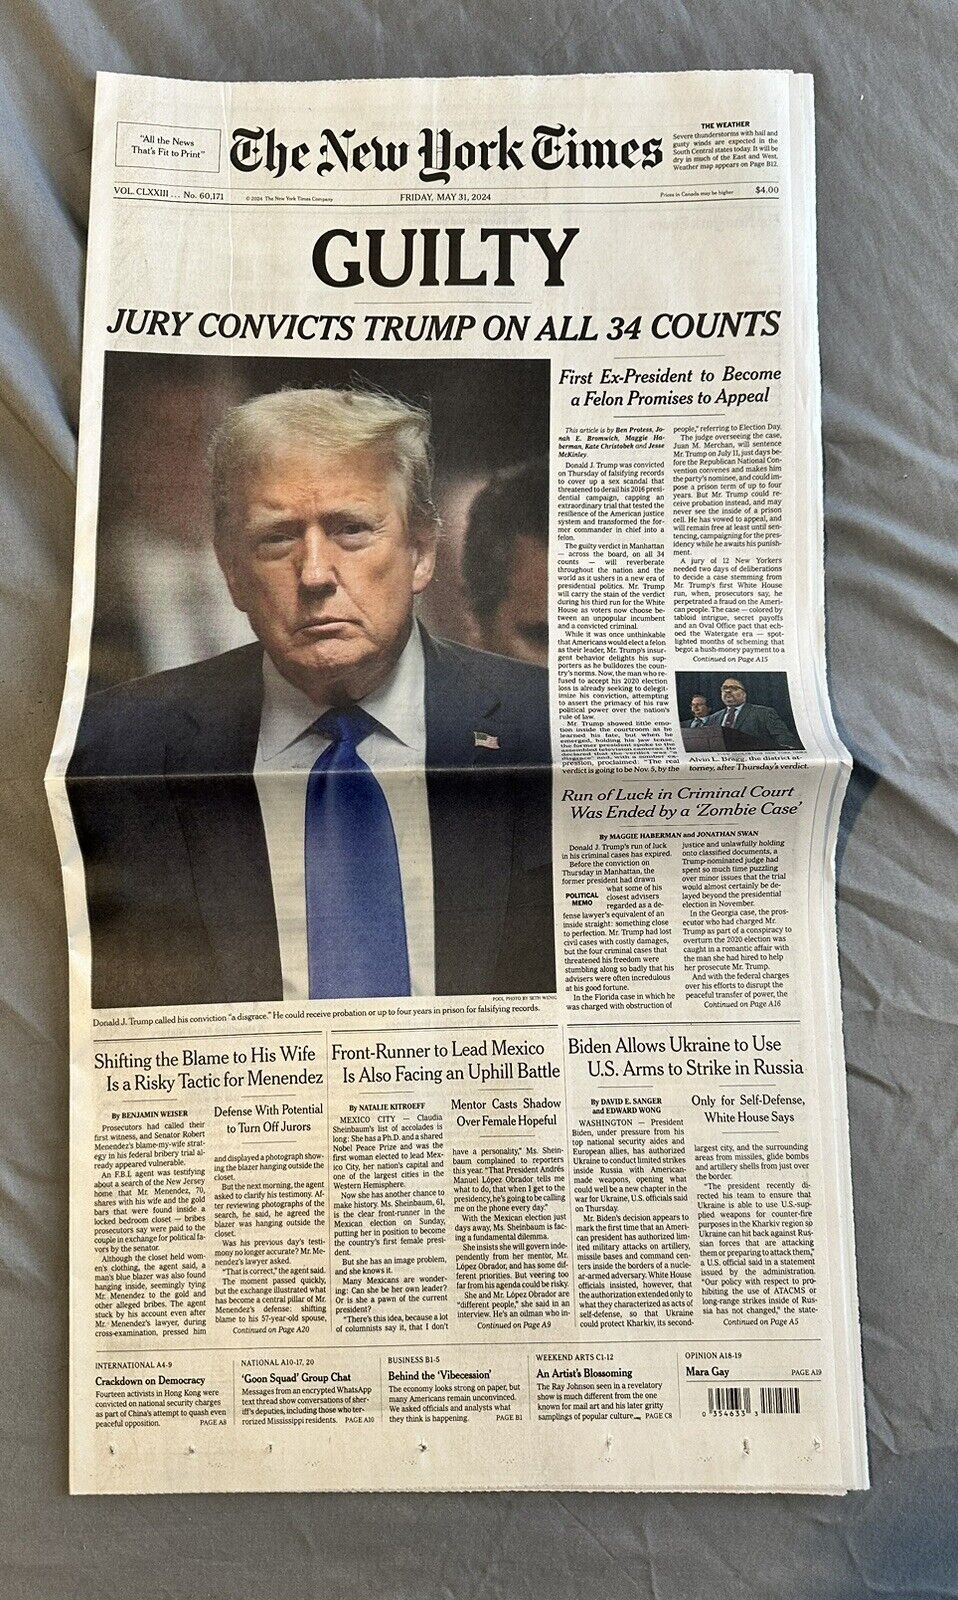 NEW YORK TIMES NEWSPAPER - TRUMP GUILTY ON ALL 34 COUNTS - MAY 31, 2024 FRIDAY